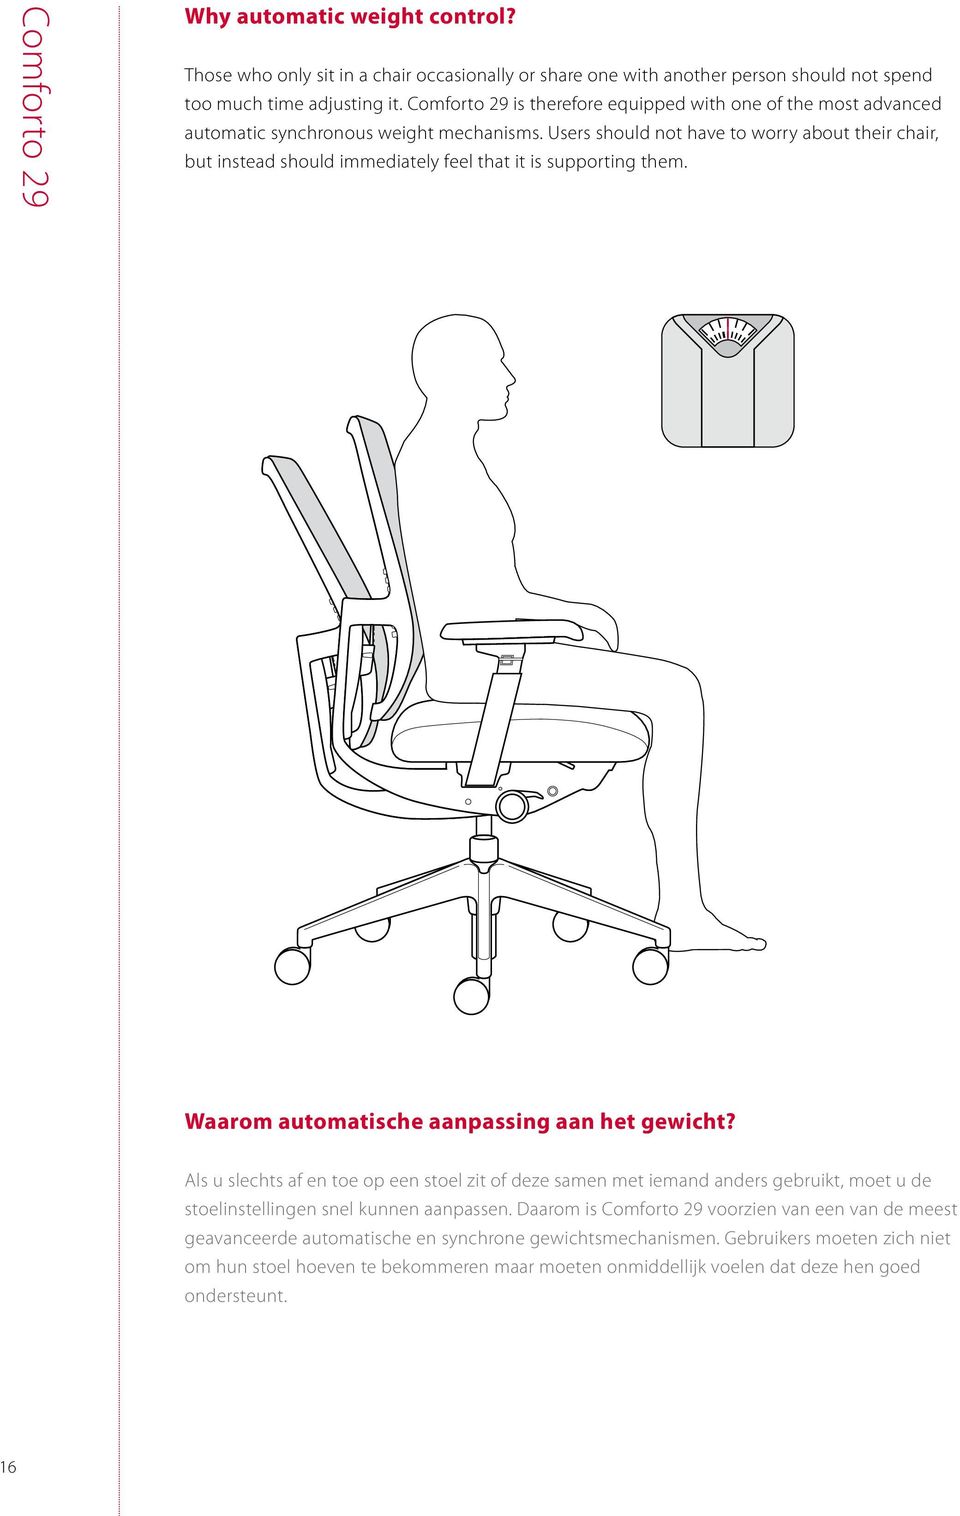 Users should not have to worry about their chair, but instead should immediately feel that it is supporting them. Waarom automatische aanpassing aan het gewicht?